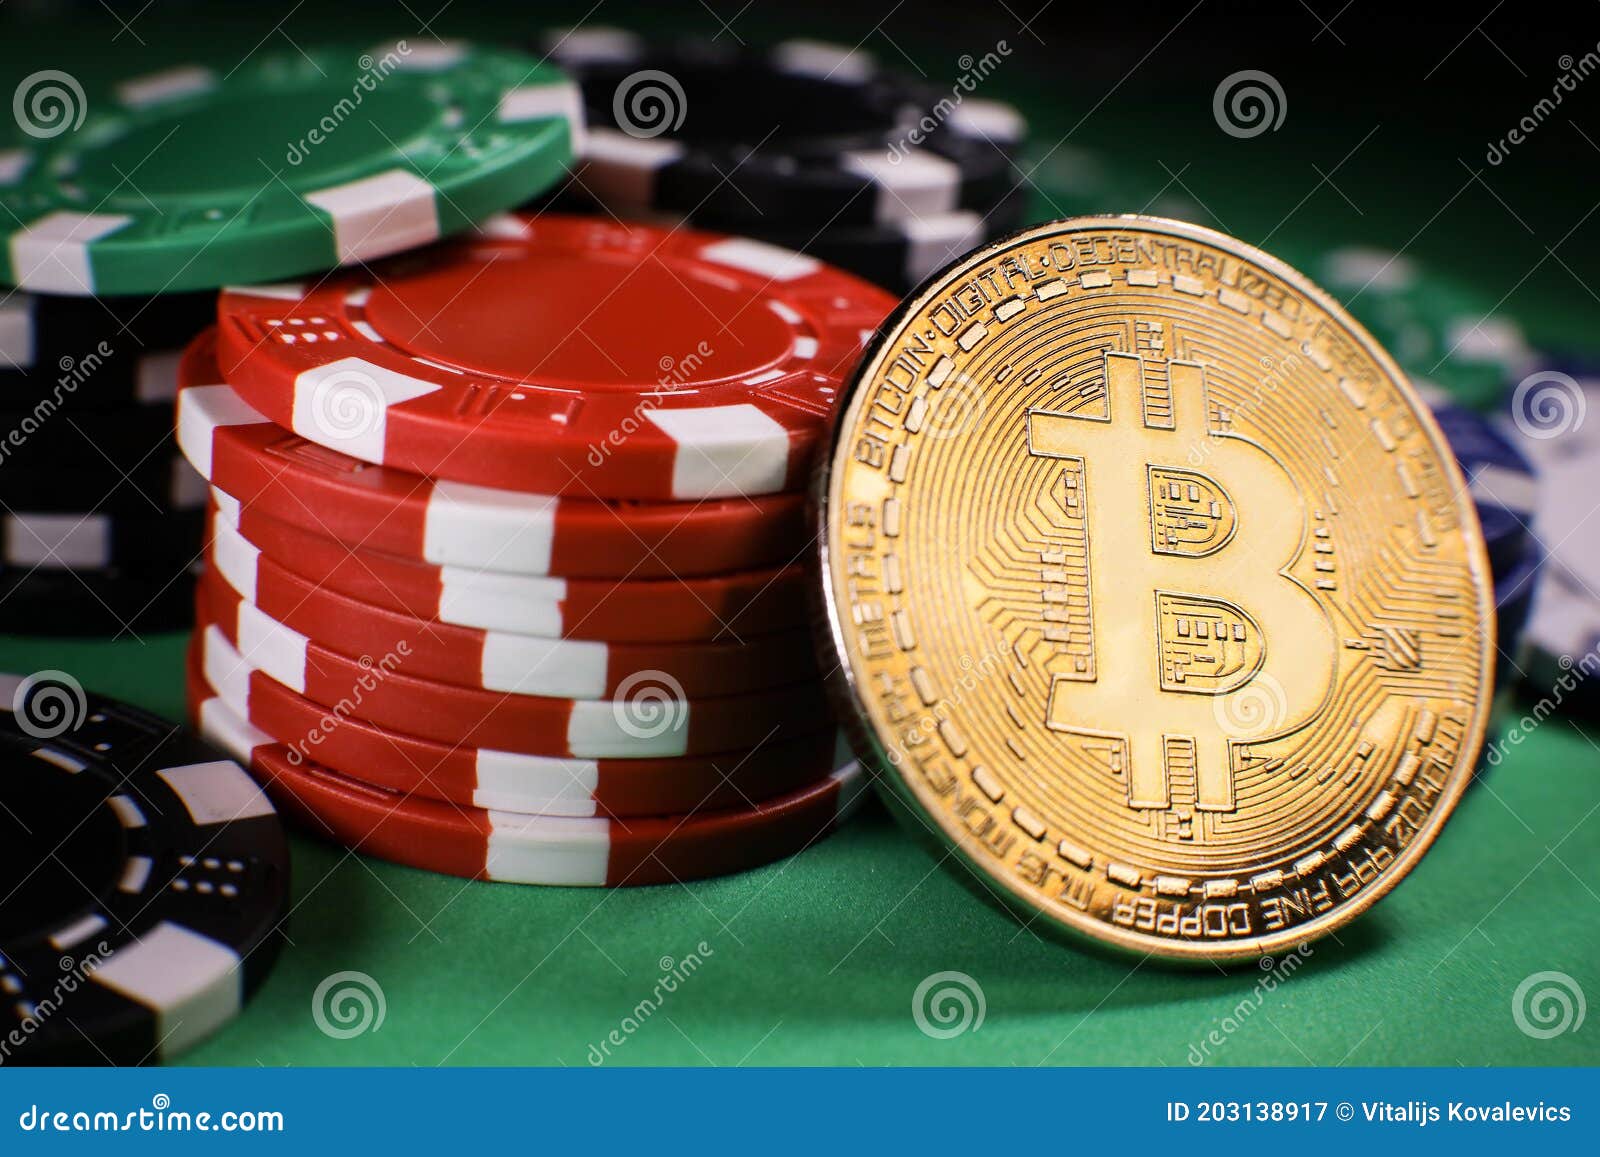 Where Will btc casino Be 6 Months From Now?